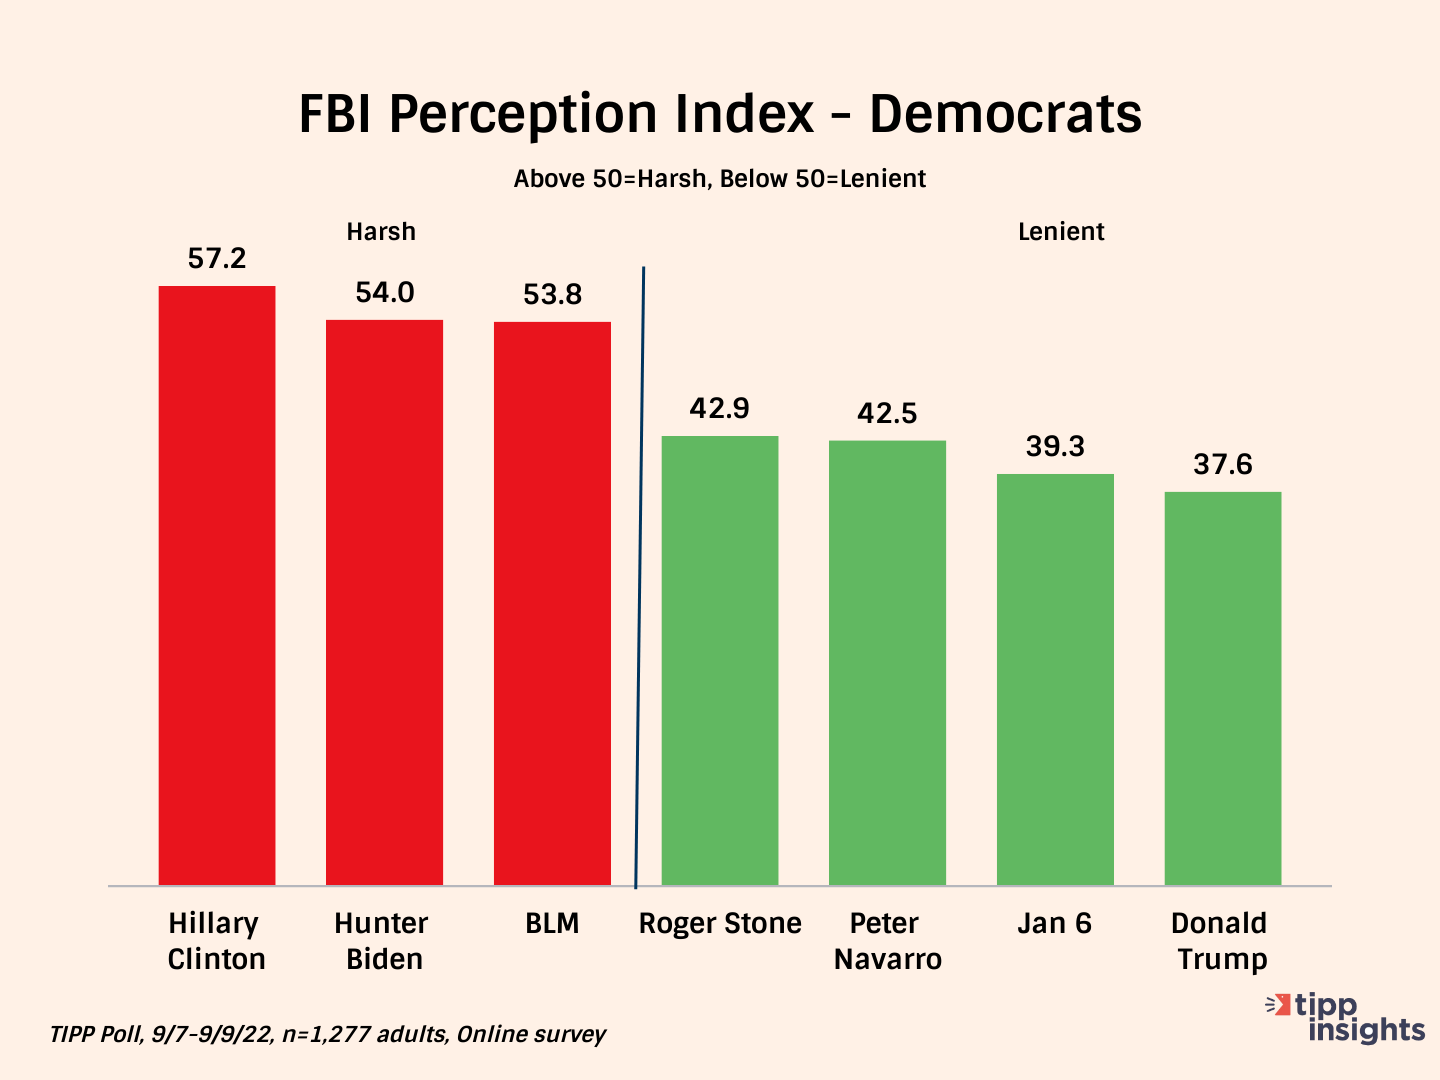 TIPP Poll Results 9/7-9/9/22: Democrats perception of the FBI's handling of Hillary Clinto email servers, Hunter Biden laptop, Black Lives Matter, Roger Stone, Peter Navarro, January 6th, and Donald Trump. 